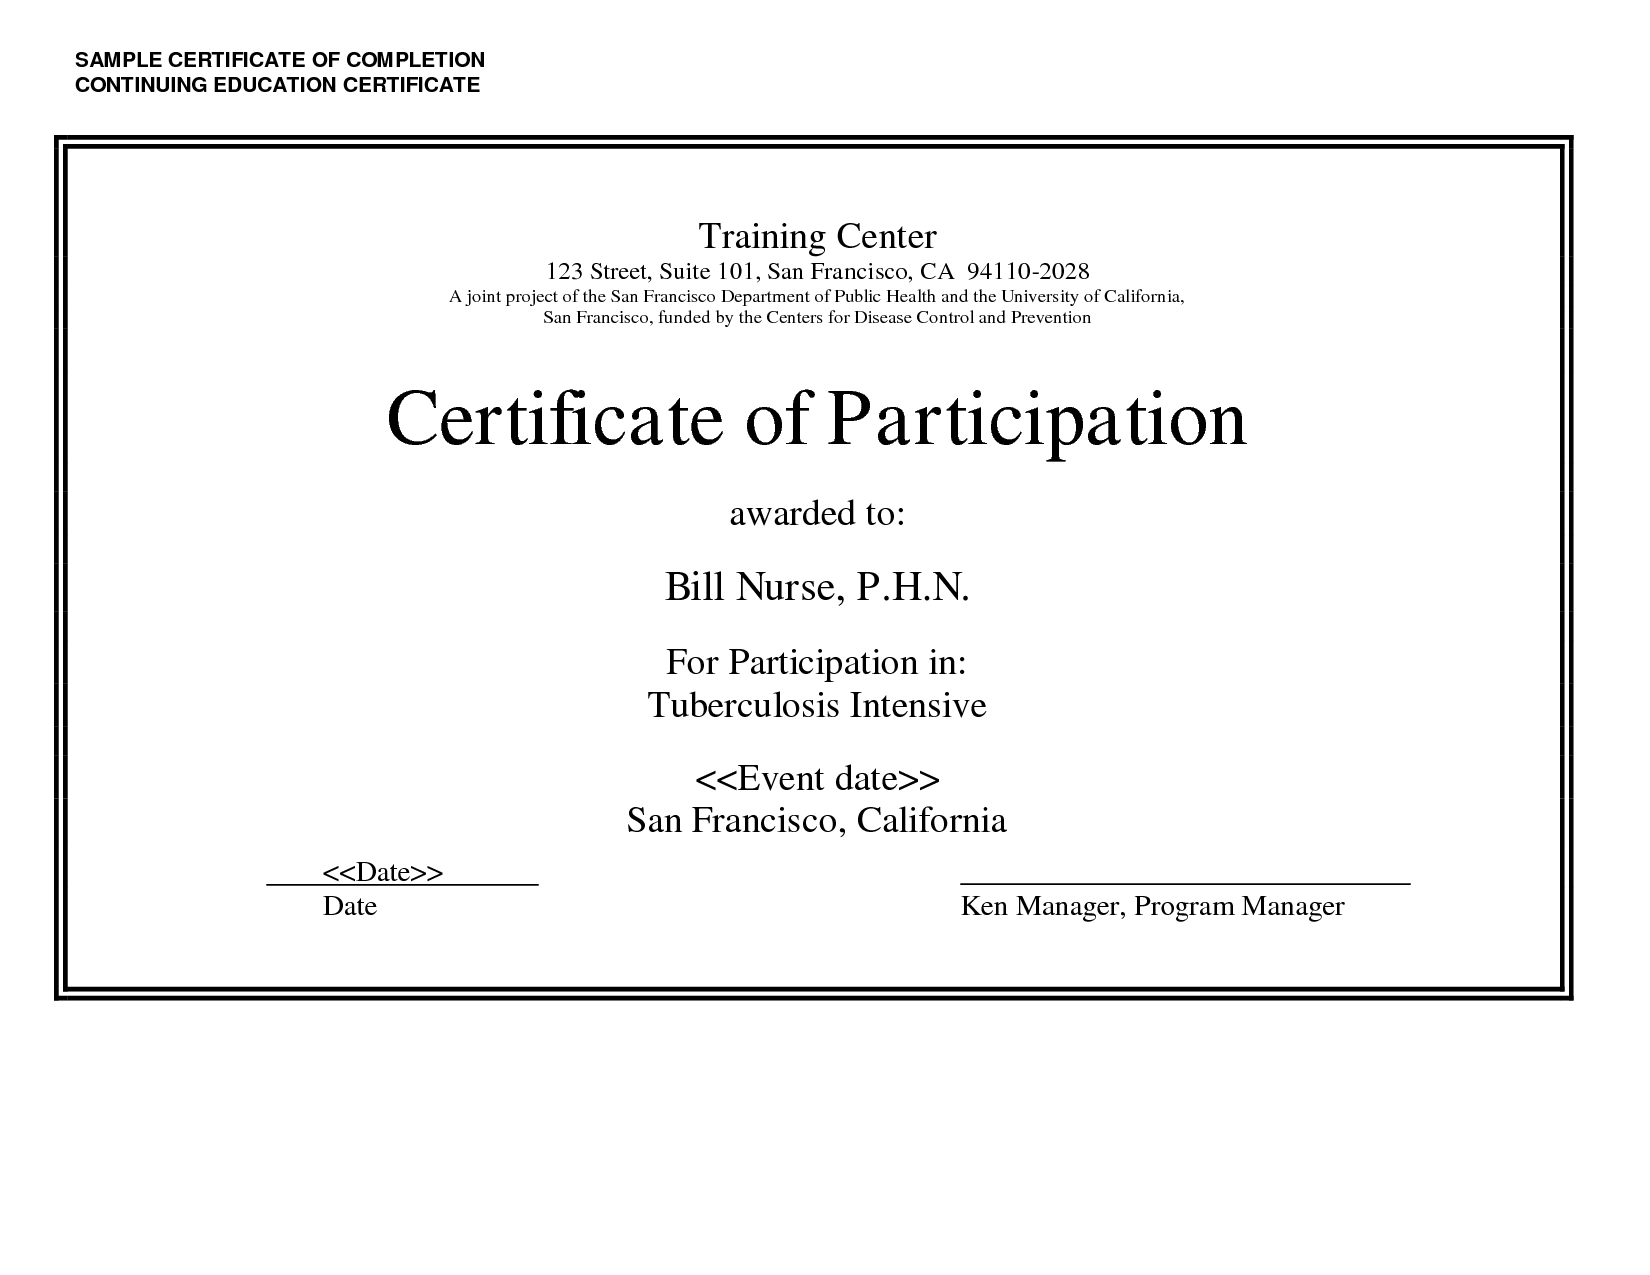 Sample Certificate Of Completion Continuing Education Regarding Continuing Education Certificate Template